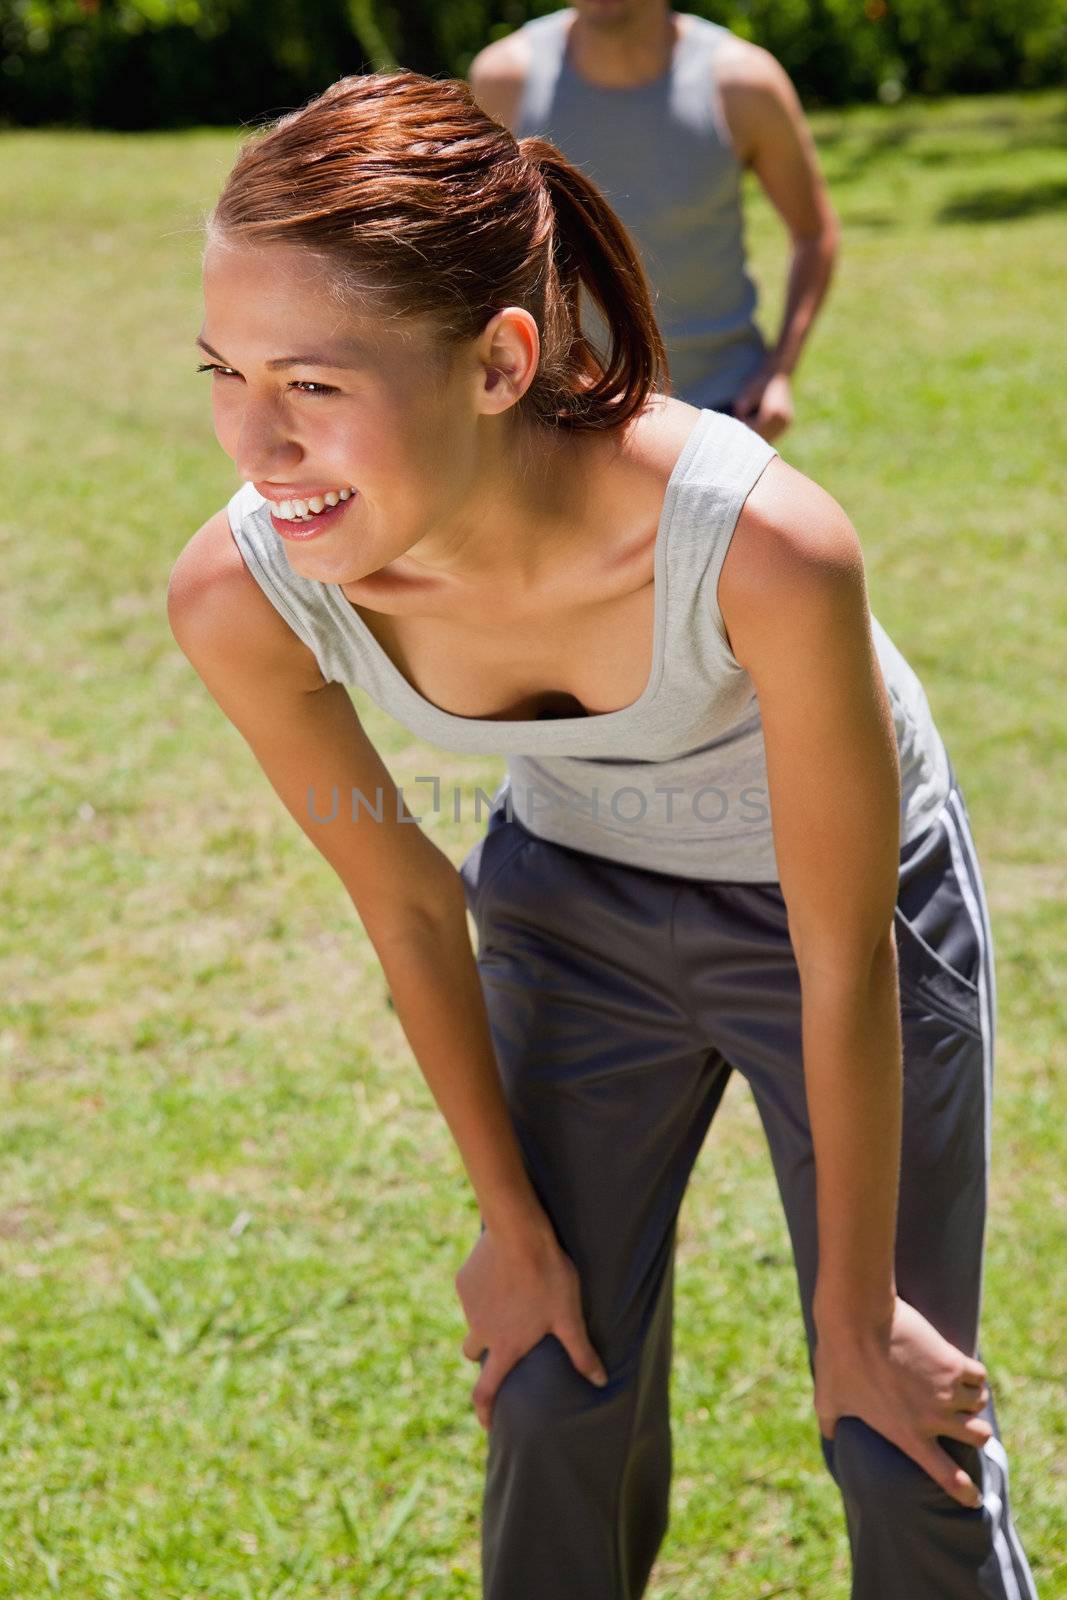 Smiling woman bending over while a man is walkng behind her by Wavebreakmedia